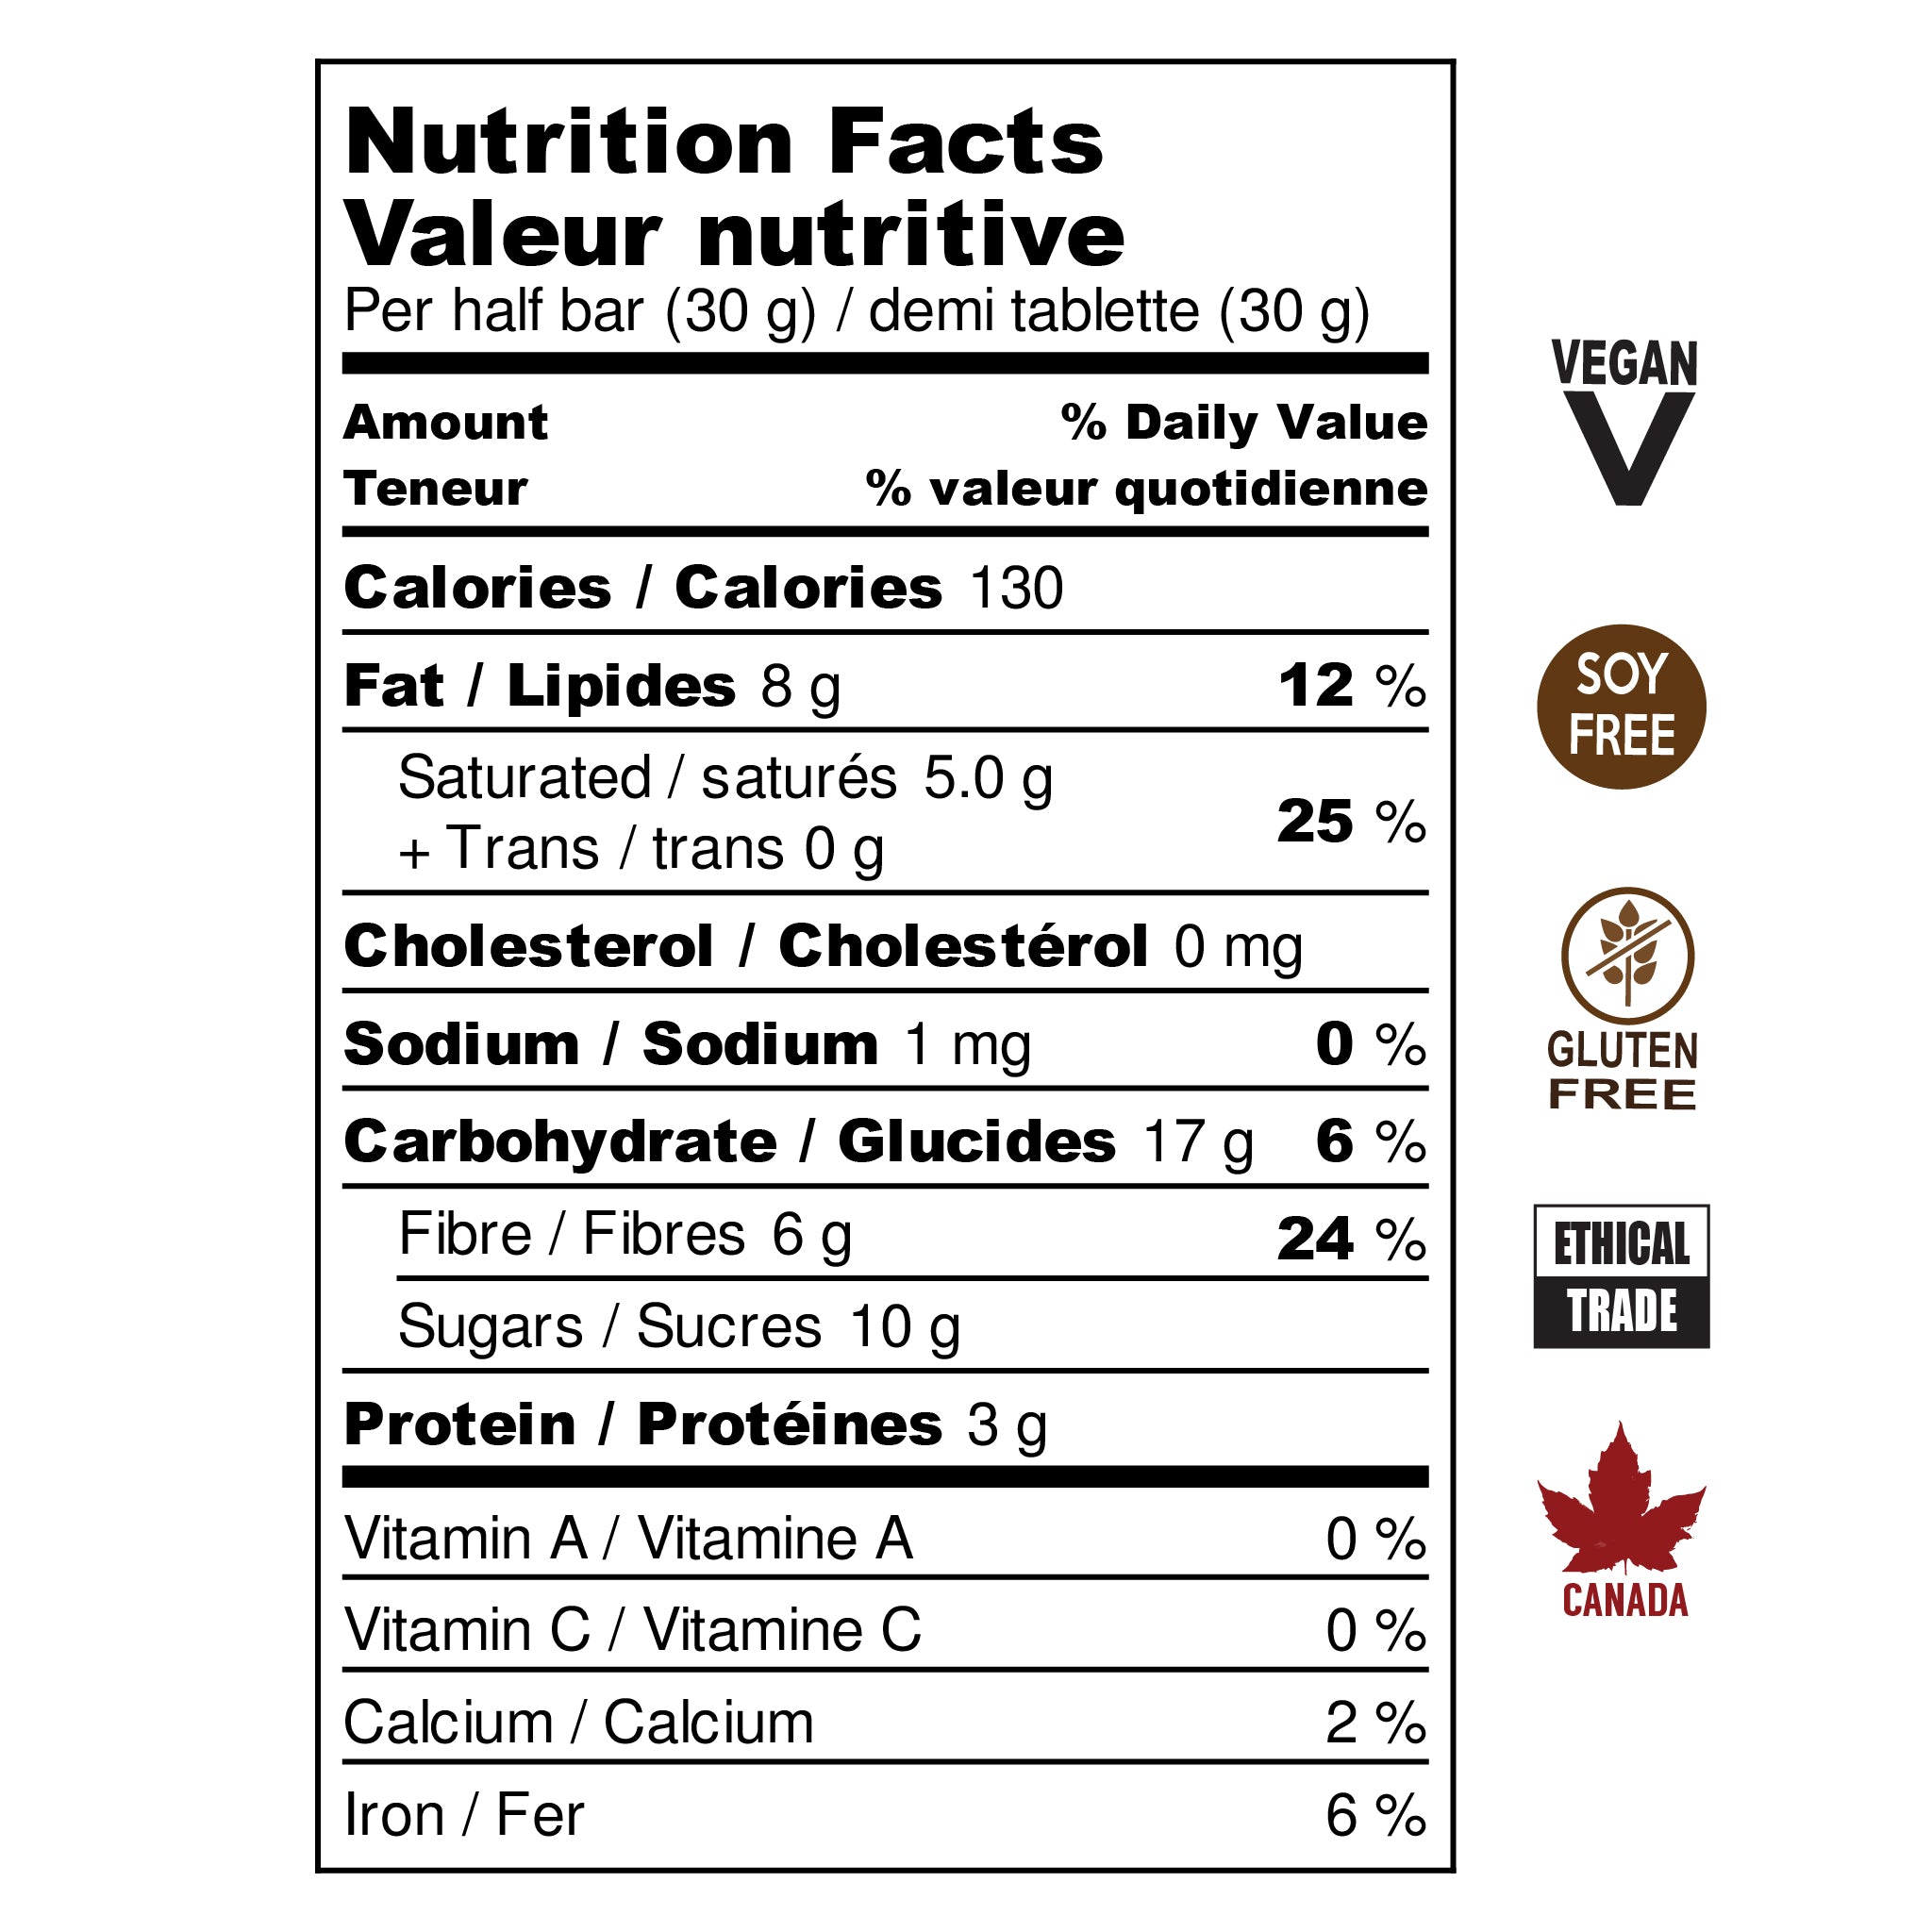 Maple 65% chocolate bar nutritional information. Vegan, Soy Free, Gluten Free, Ethical Trade, Made in Canada